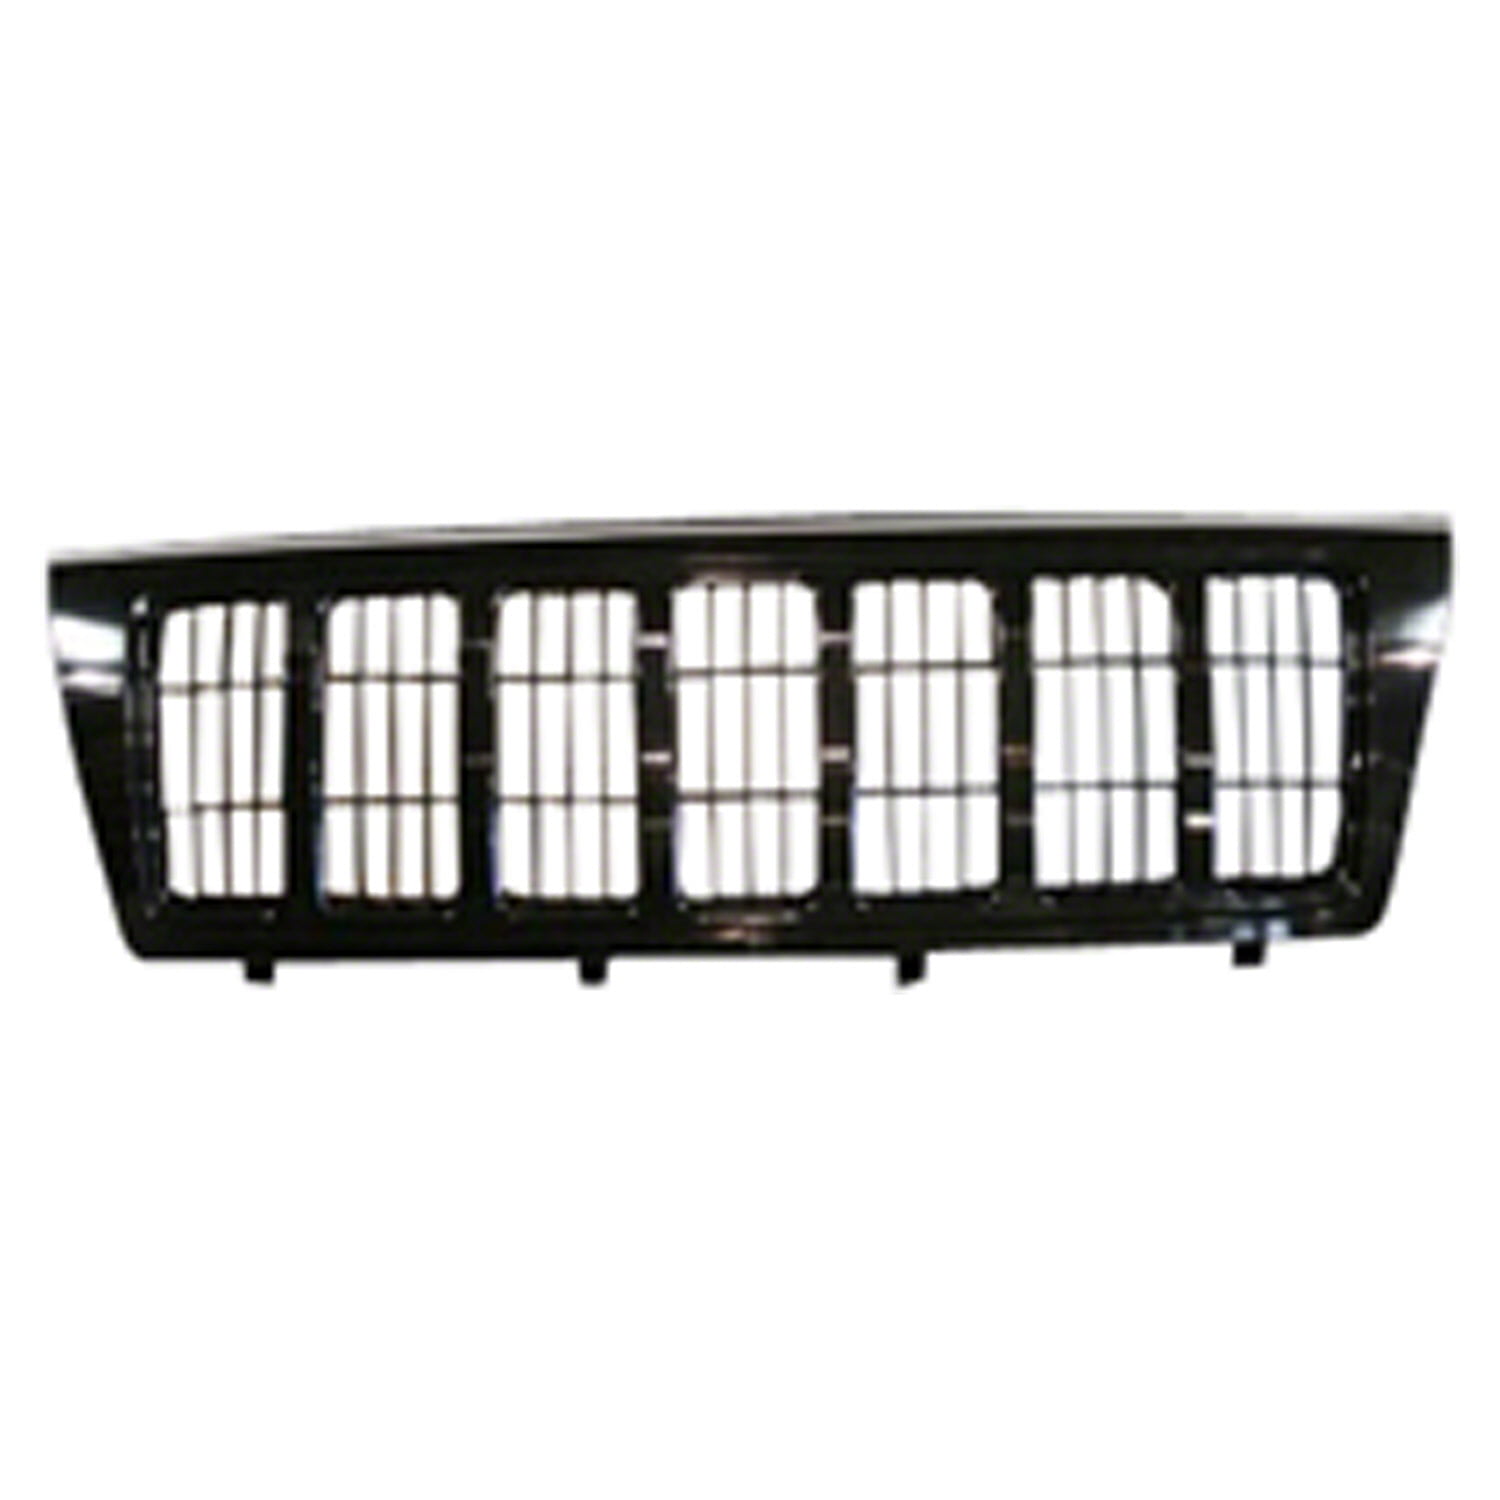 Front Grille Insert For 1999-2003 Jeep Grand Cherokee Black CH1200222 5FT35DX9